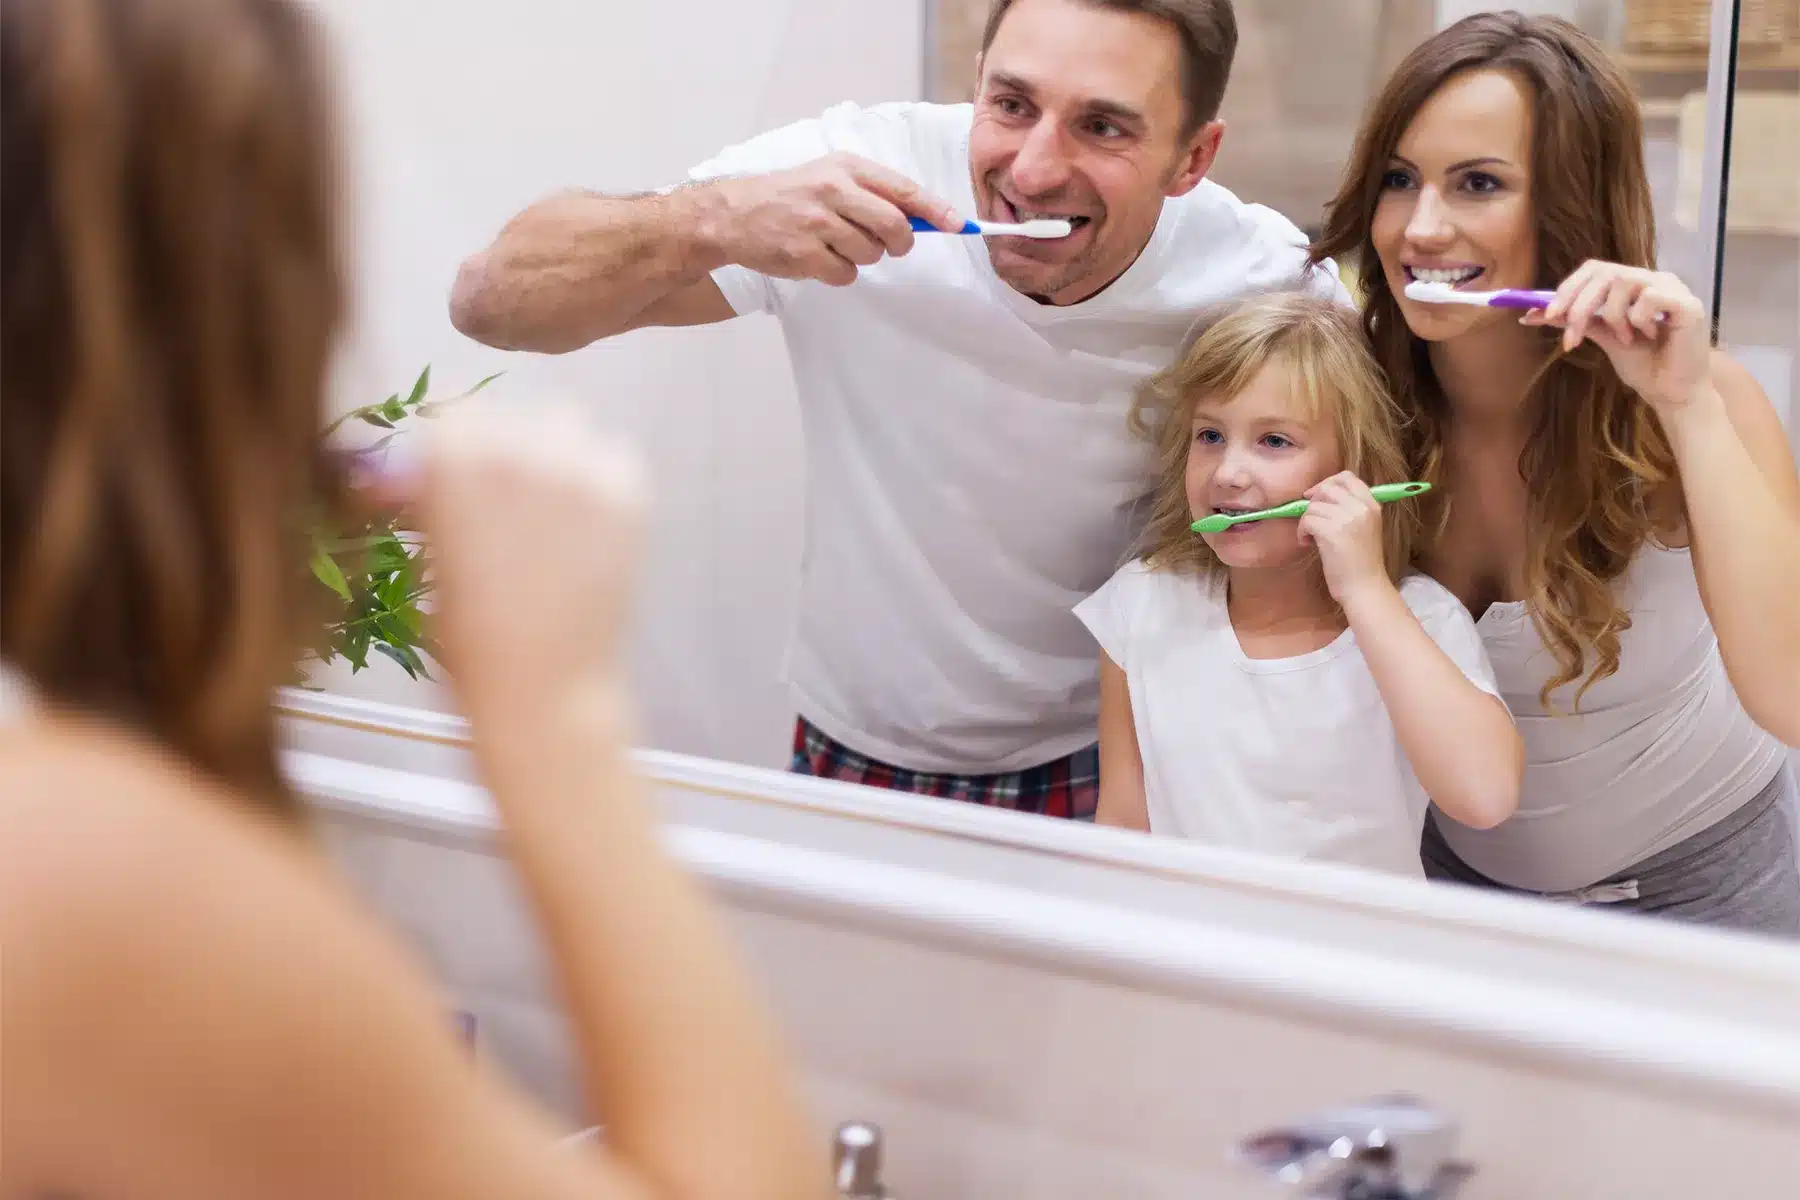 Three Tips to protect your teeth over the holidays